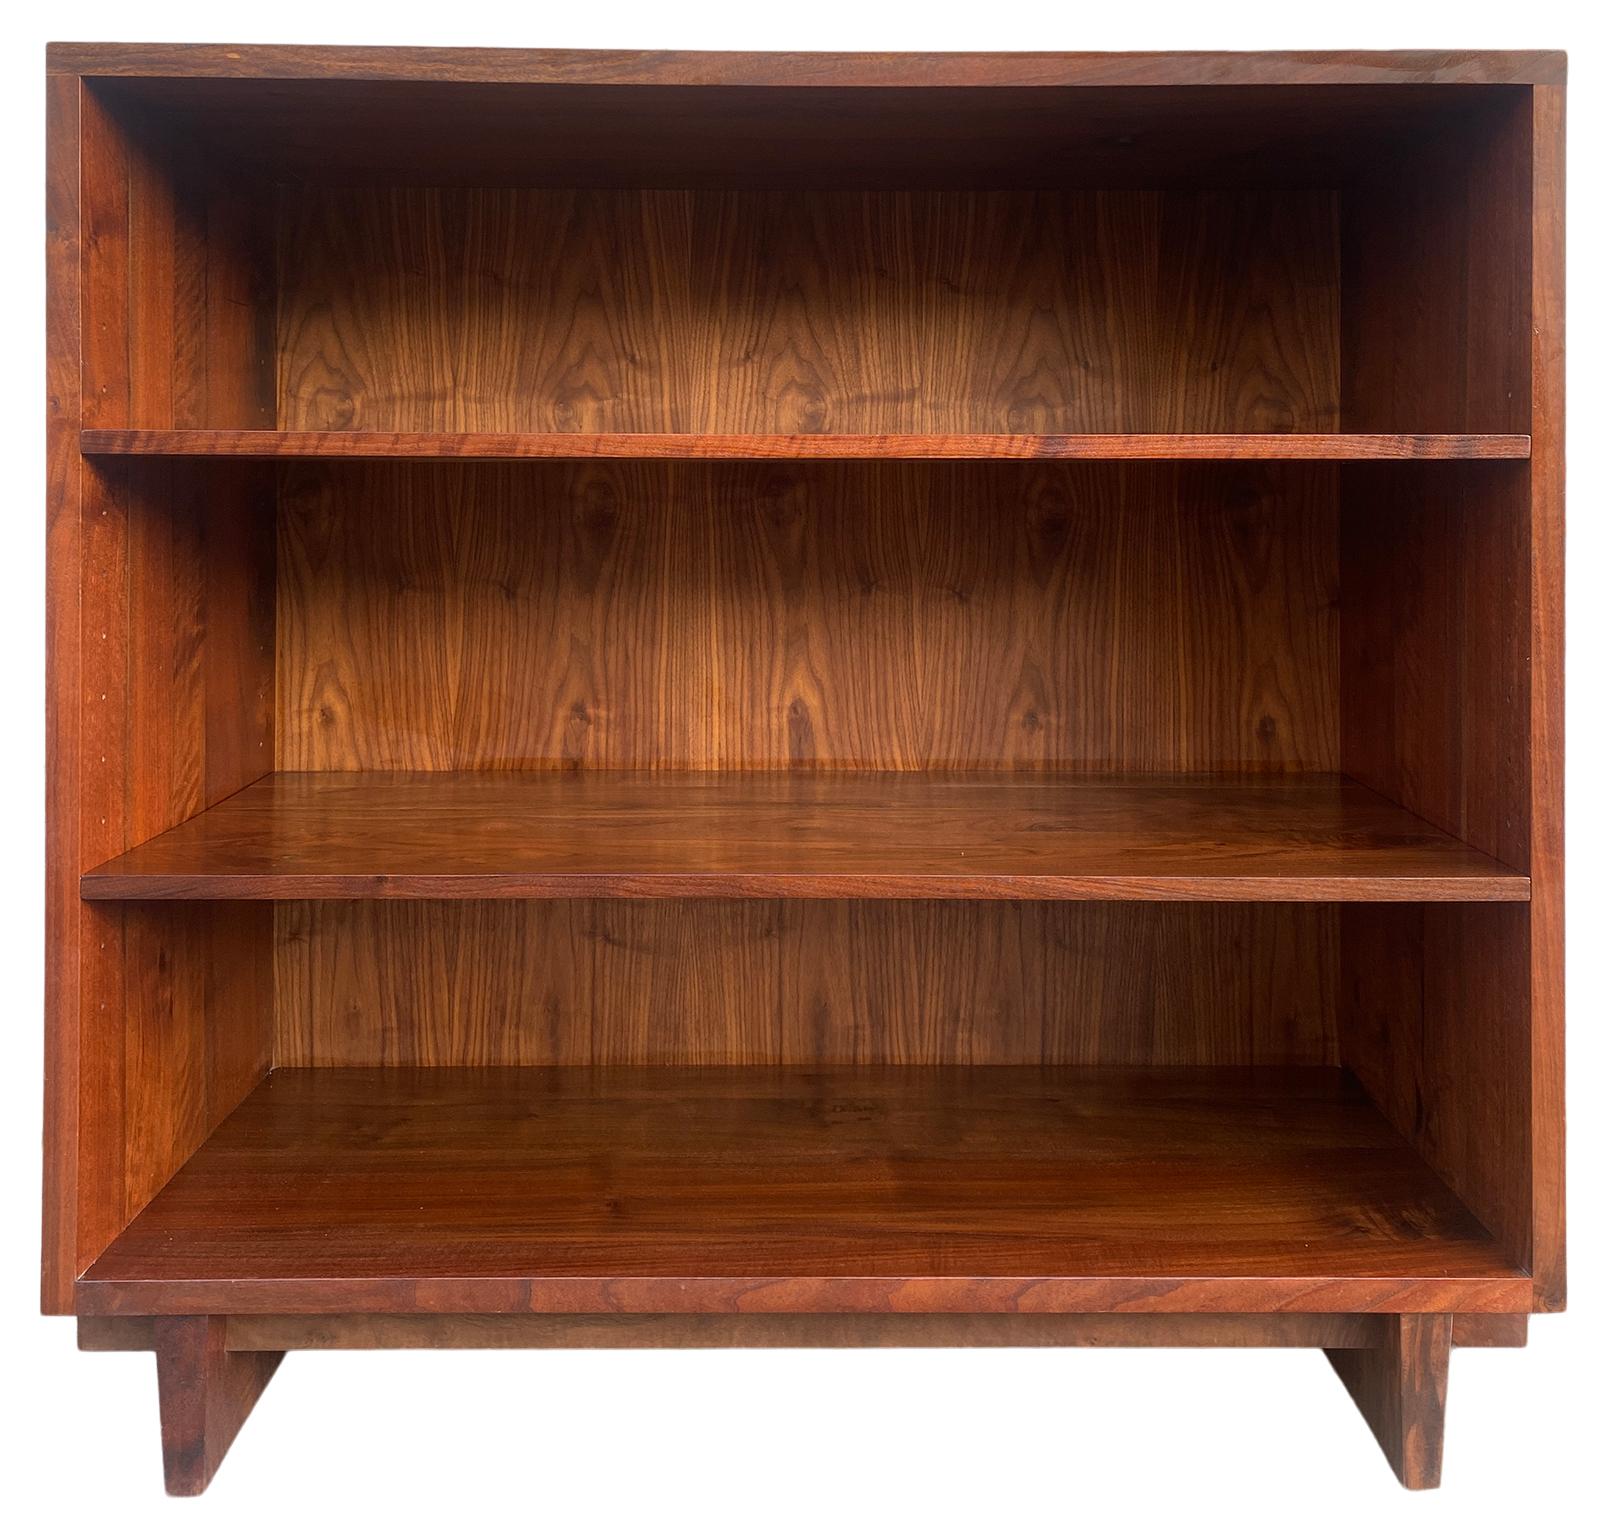 Vintage Mid-Century Modern in the style of George Nakashima large deep bookcase made of solid black walnut American Studio craft joinery. Beautiful large bookcase custom made walnut bookcase, 2 adjustable shelves on brass pins, beautiful solid black